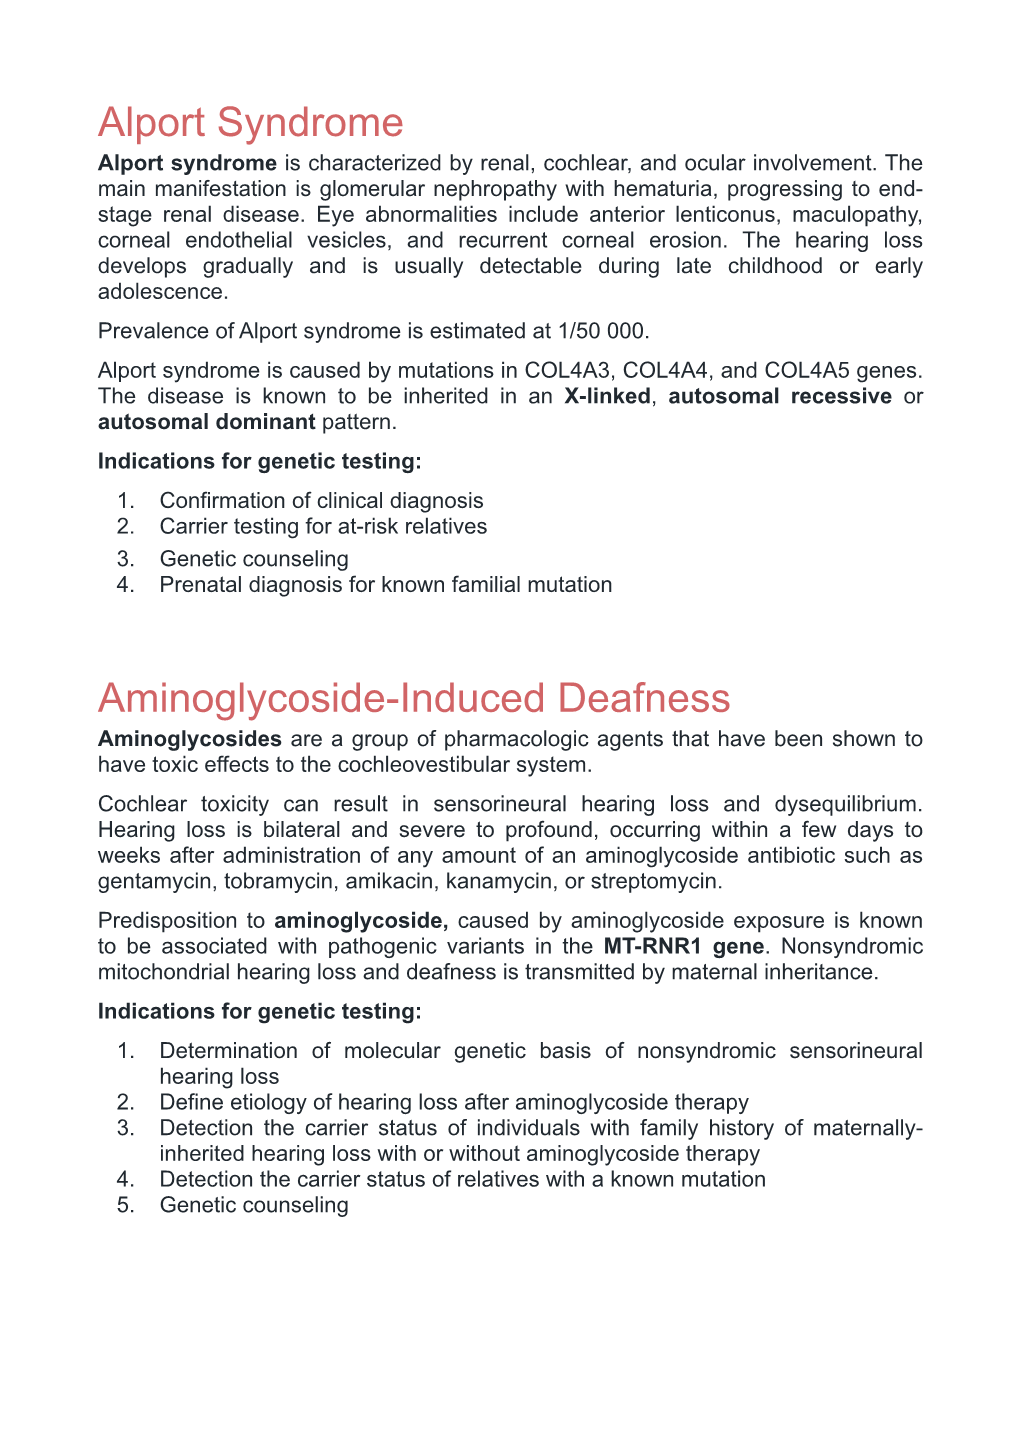 Alport Syndrome Aminoglycoside-Induced Deafness